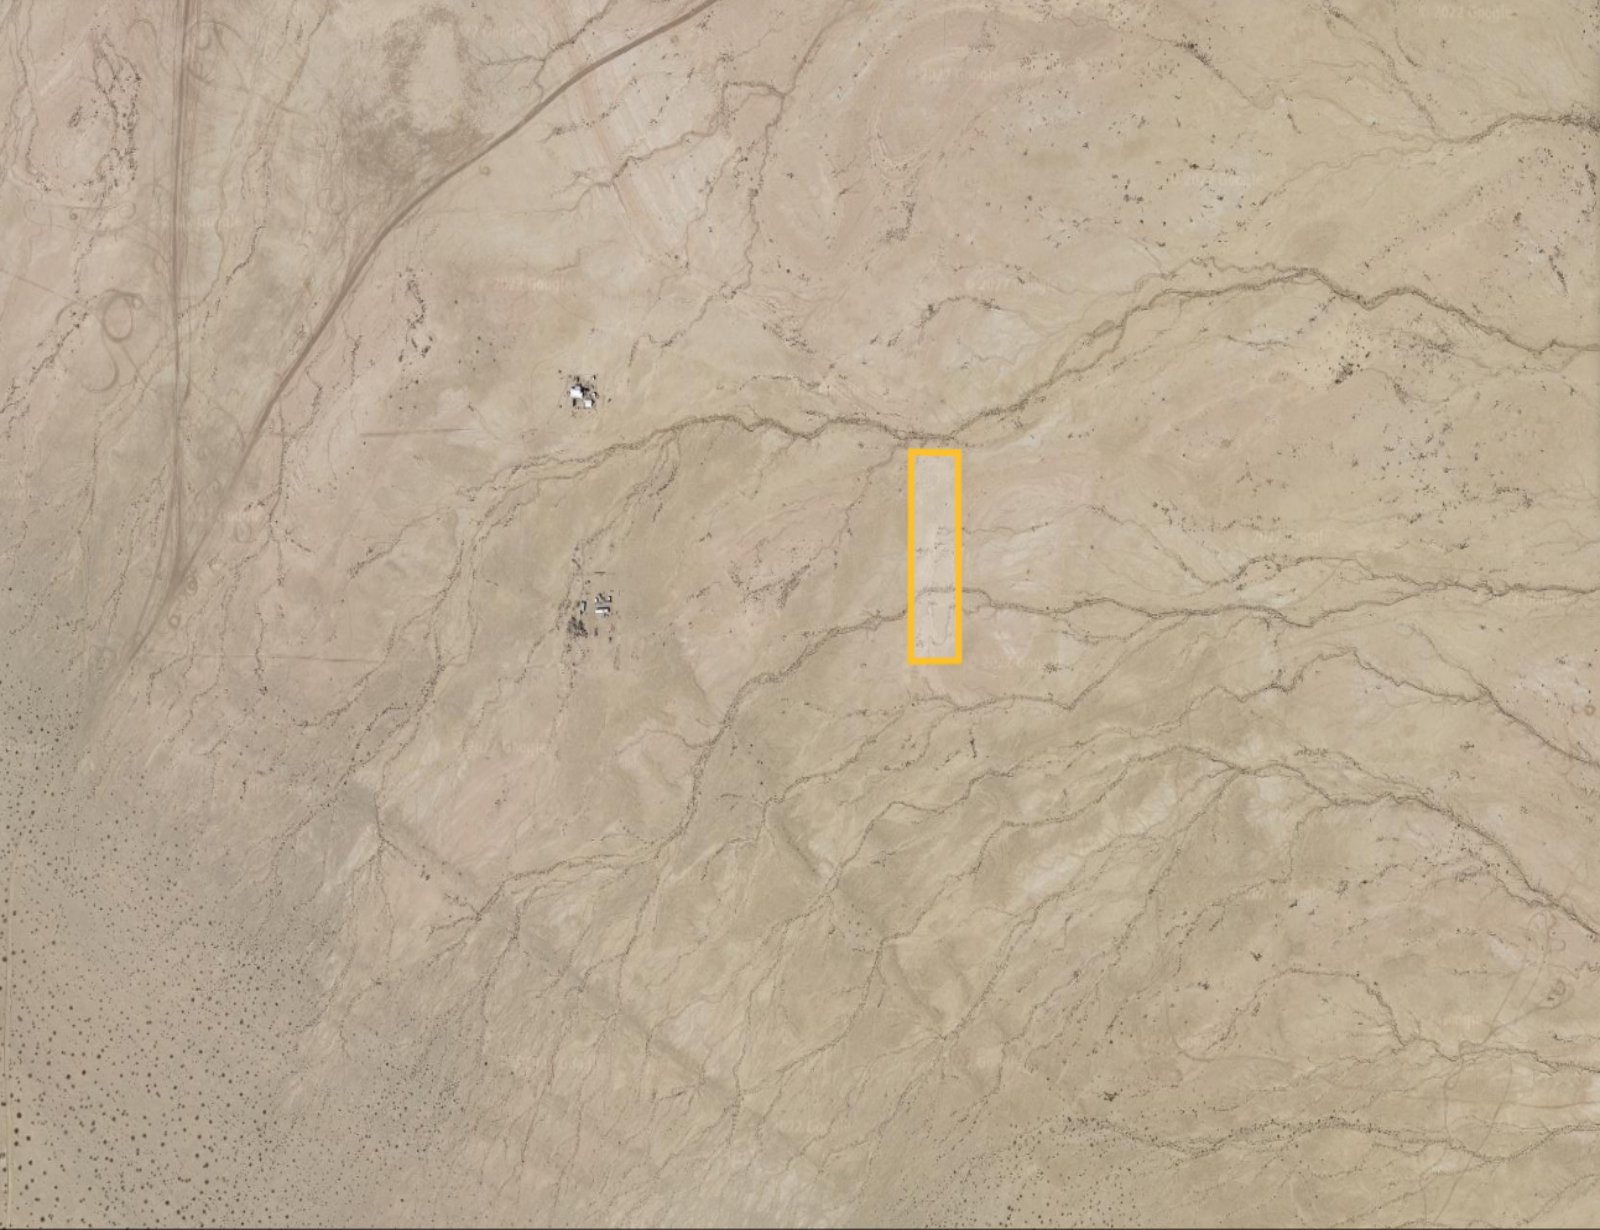 *NEW* RECREATIONAL LOT LOCATED NEAR BOMBAY BEACH!! LOW MONTHLY PAYMENTS OF $75.00  APN: 002-450-038-000 - Get Land Today